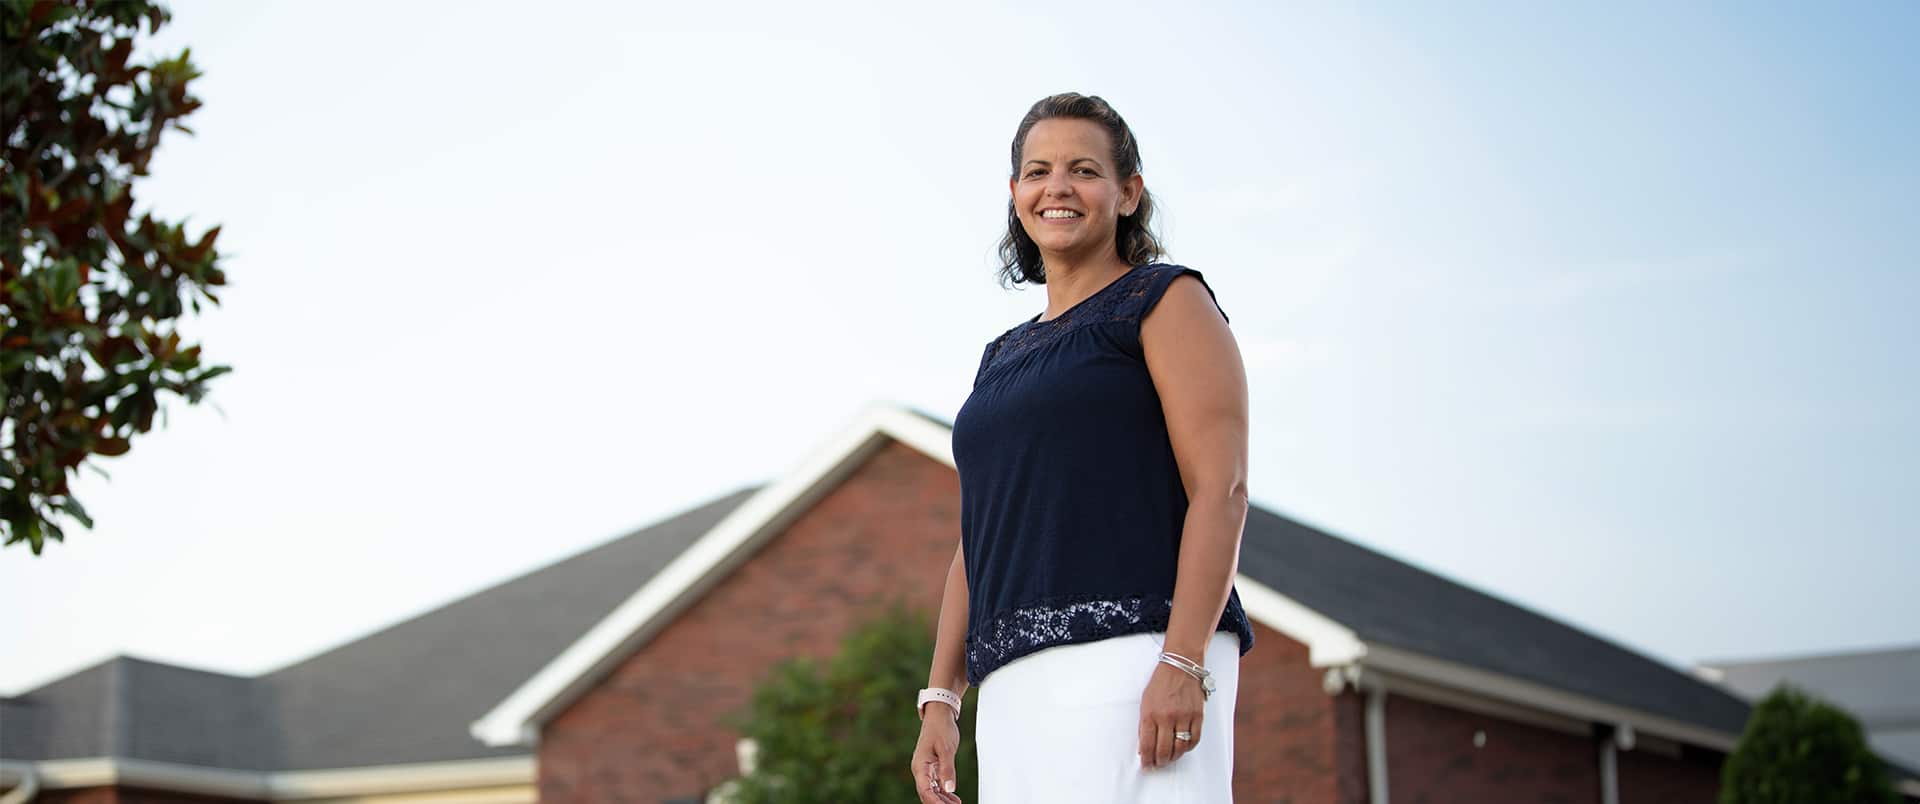 Kristi Galvin, who earned her online degree in human resources, standing in front of a house.